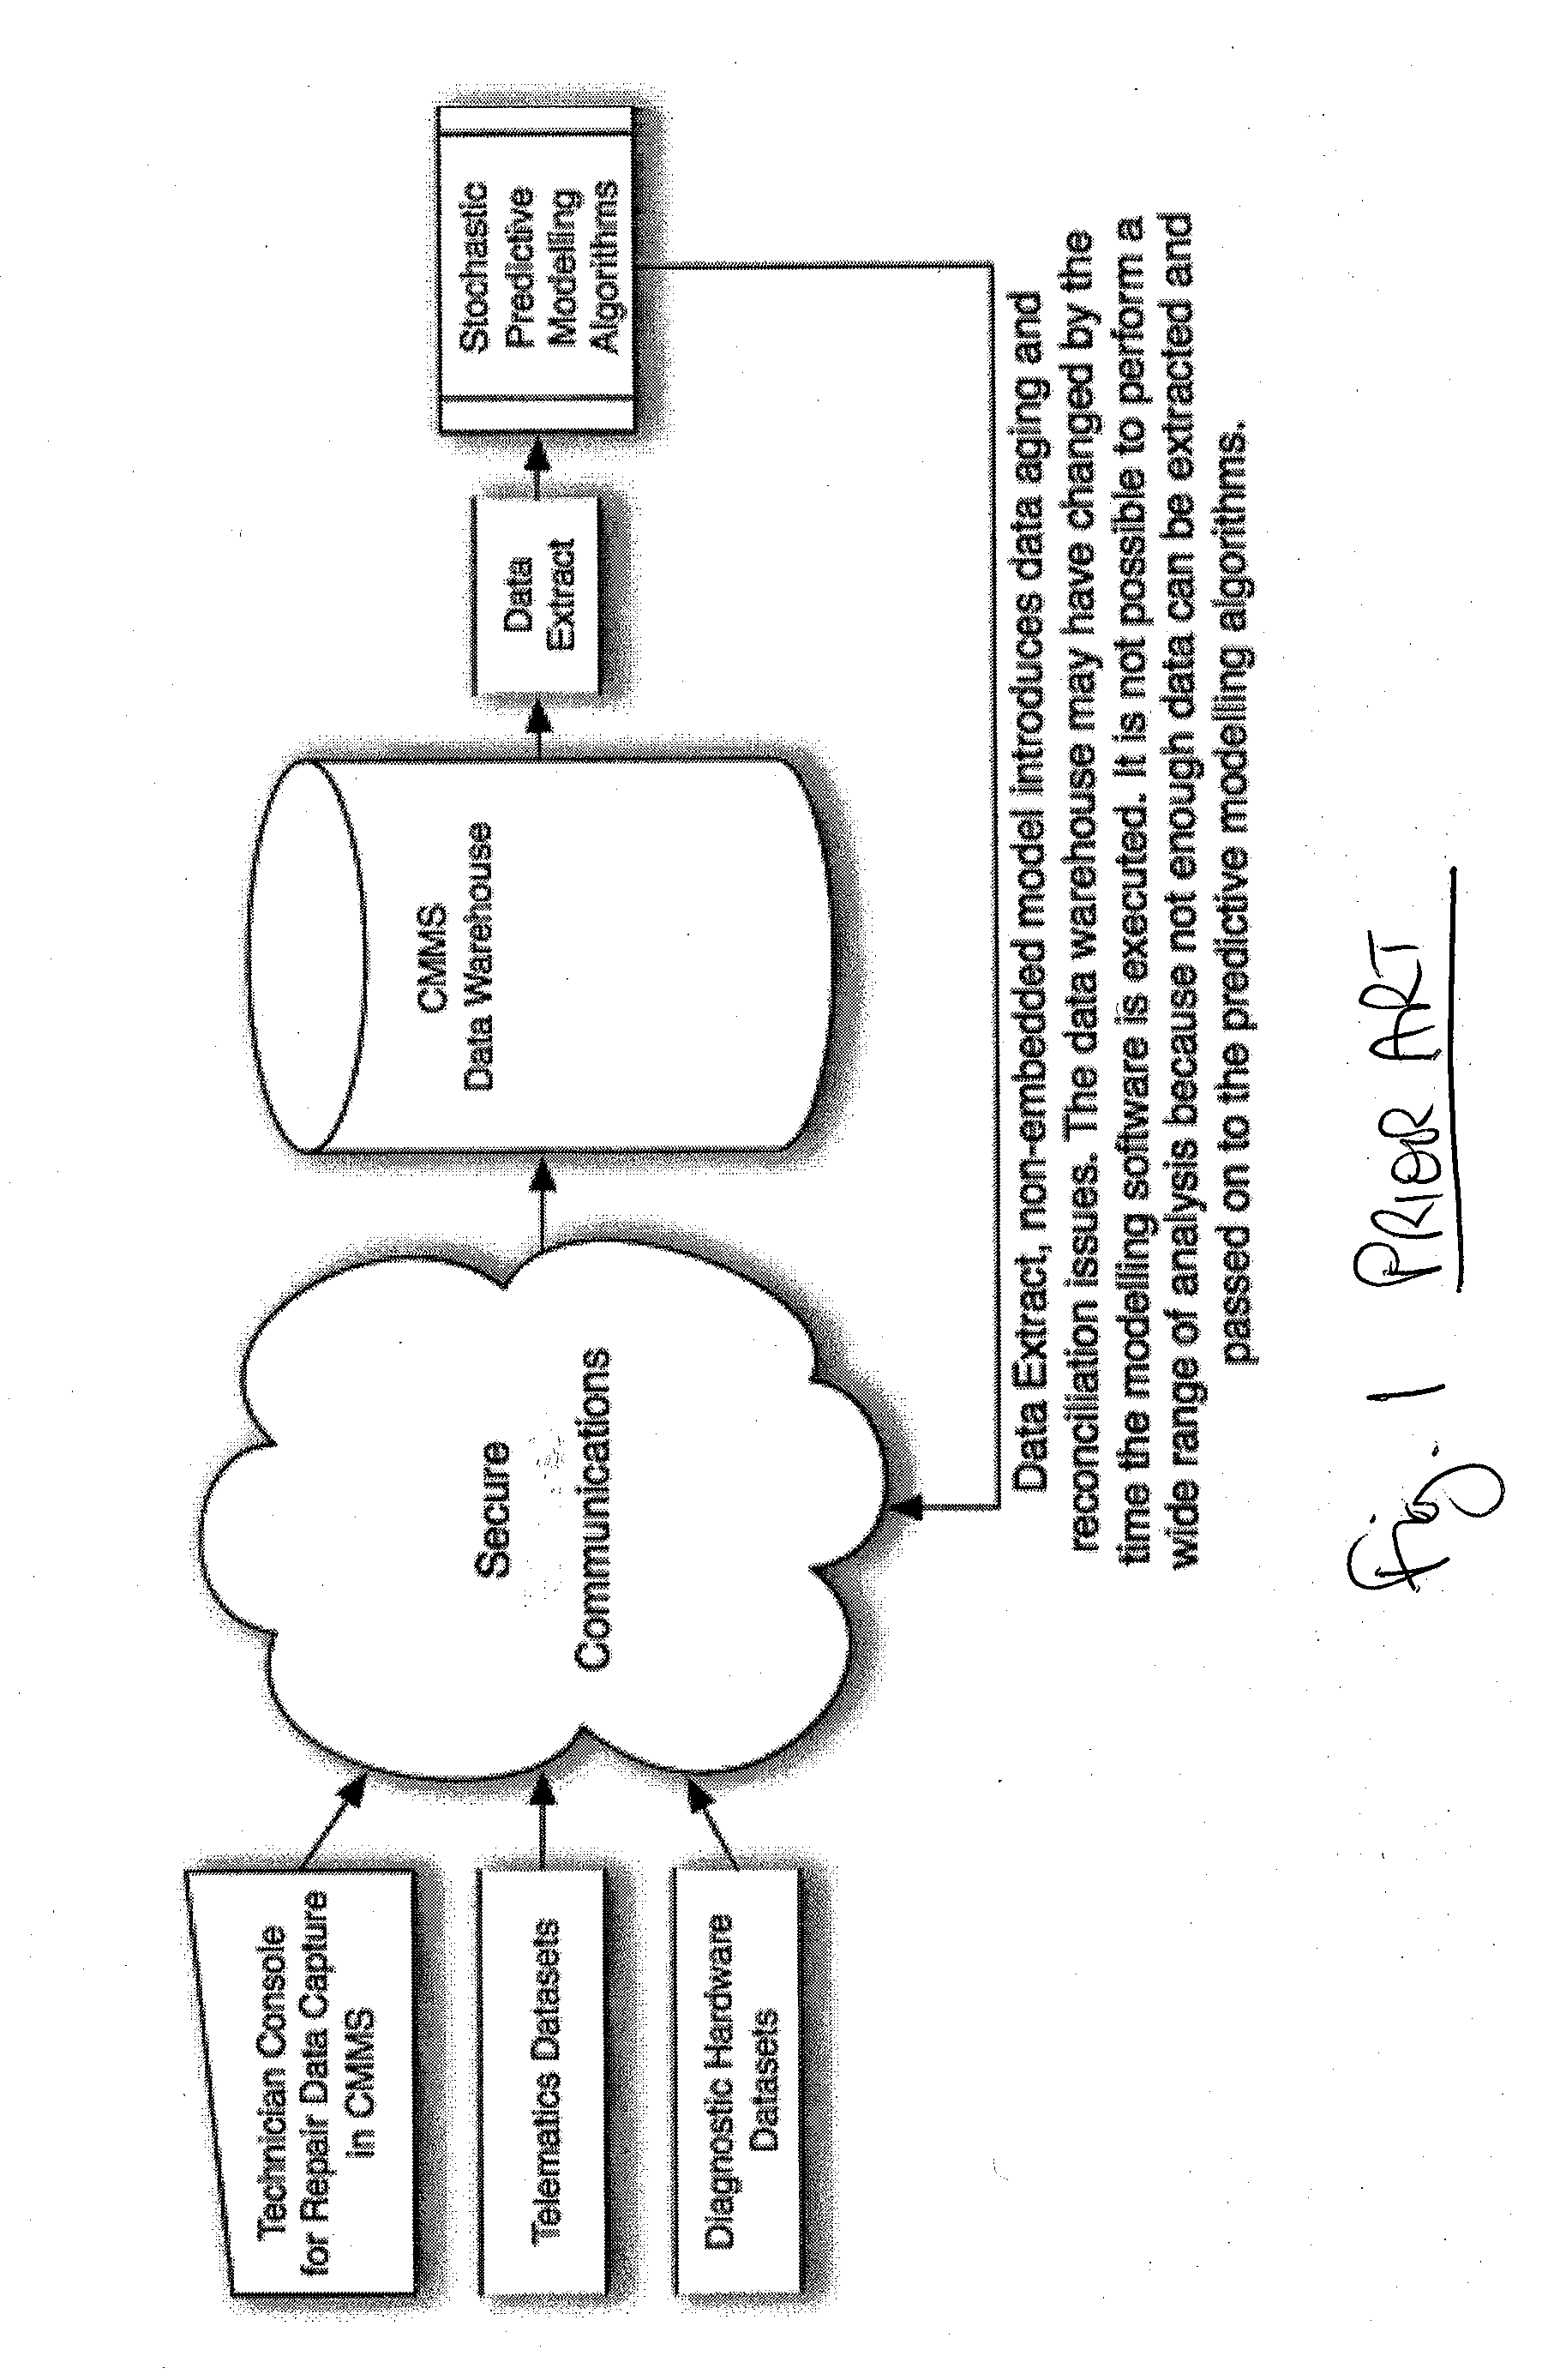 Computerized vehicle maintenance management system with embedded stochastic modelling